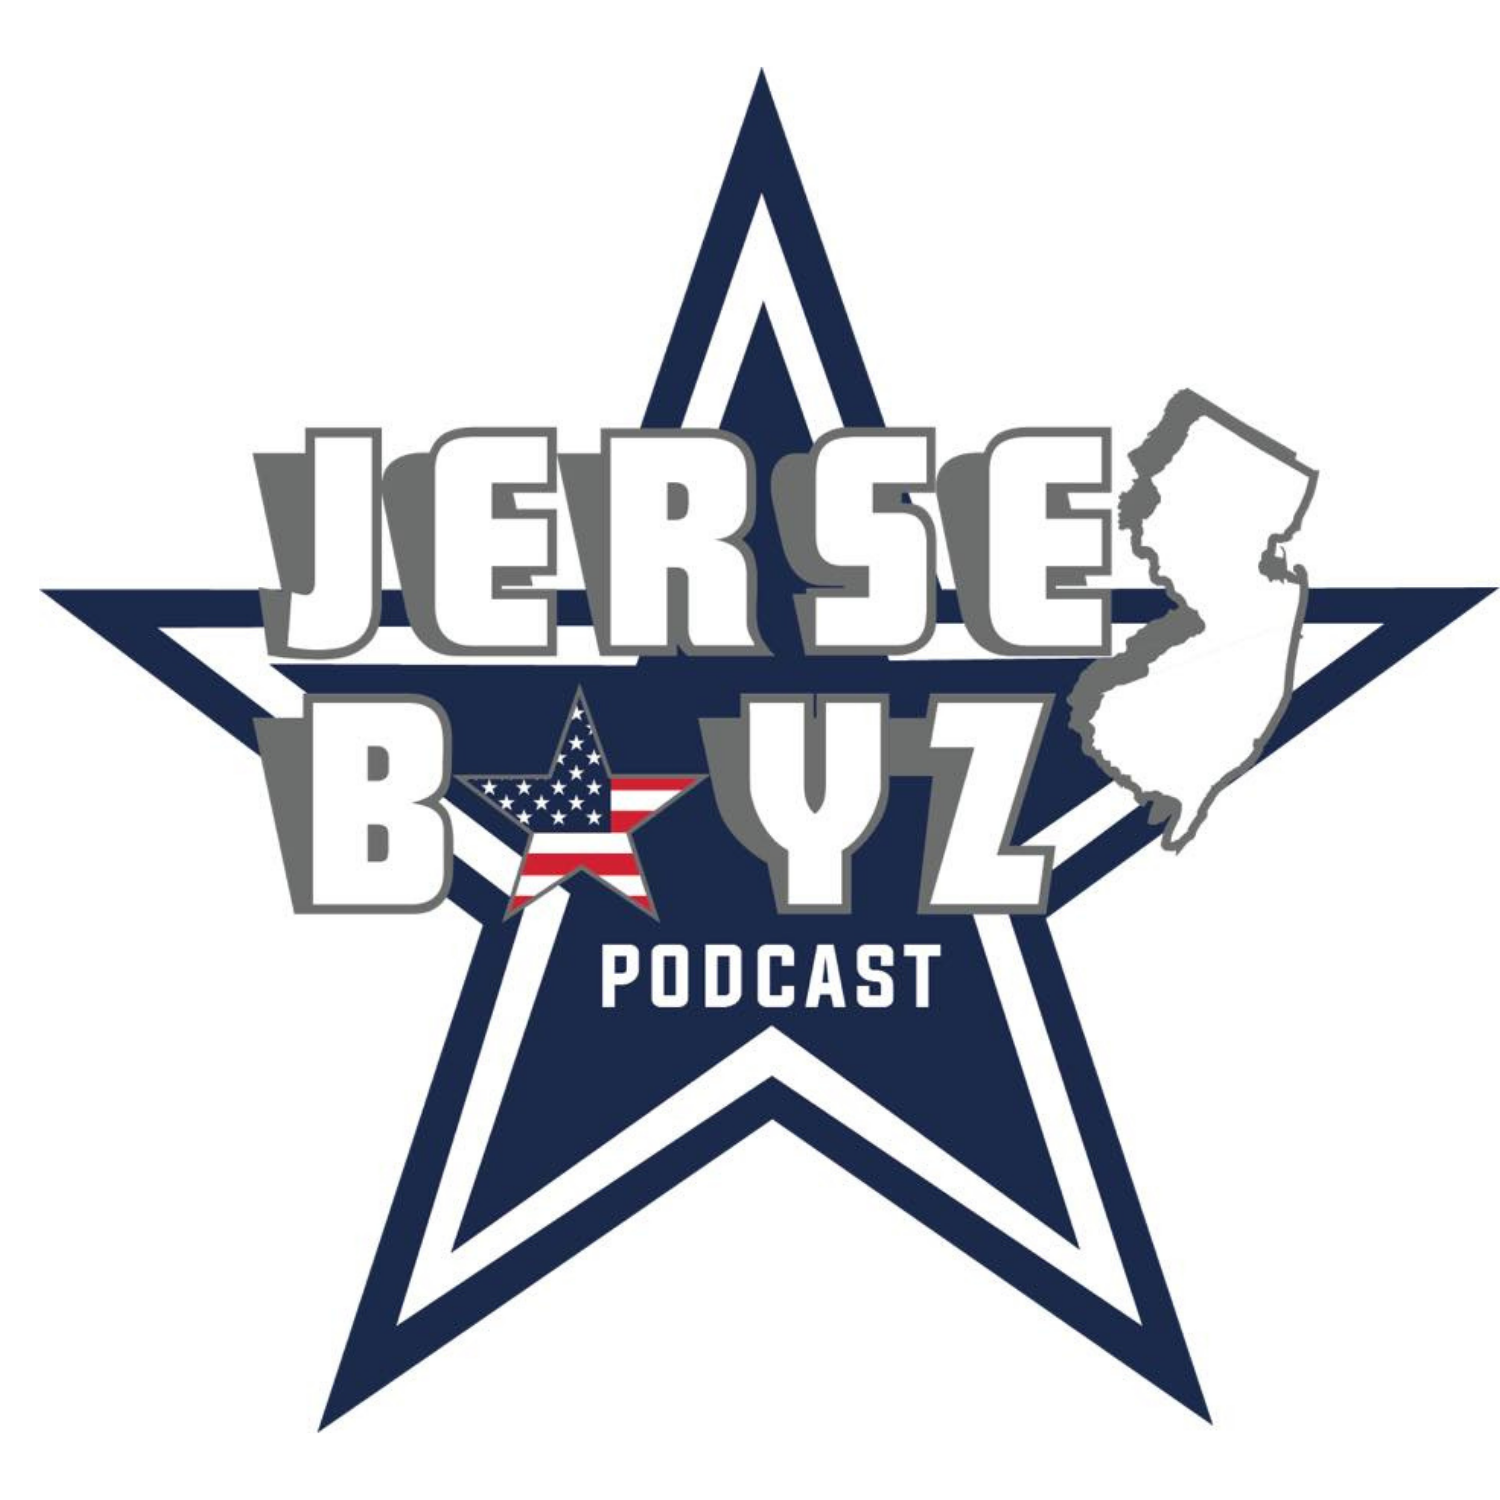 Artwork for The Jersey Boyz Podcast